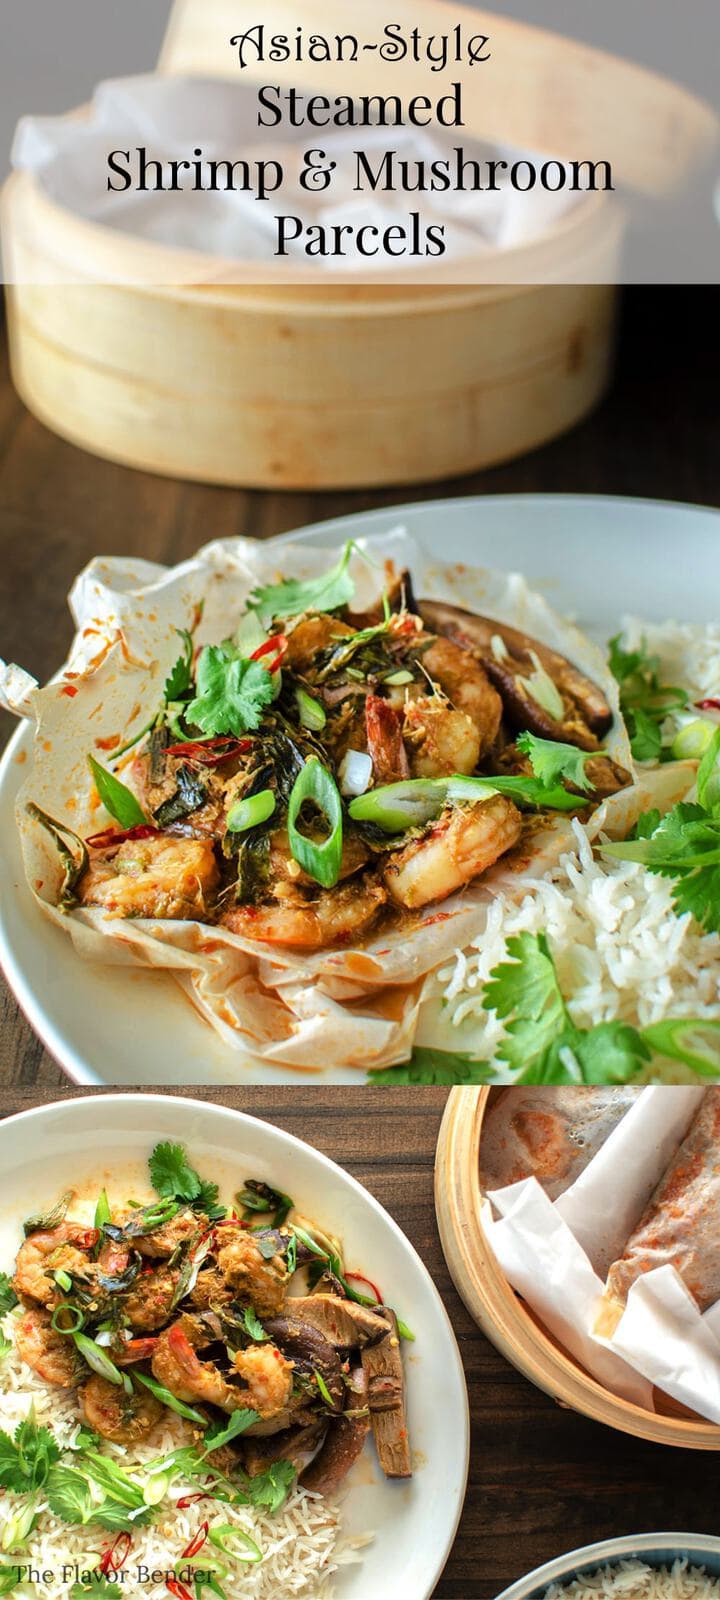 Asian-style Steamed Shrimp and Mushroom Parcels - Shrimps marinating in a wonderful spice mix steamed to perfection with mushrooms and green tea. a delicious, flavorful meal idea fit for quick dinners or for entertaining.